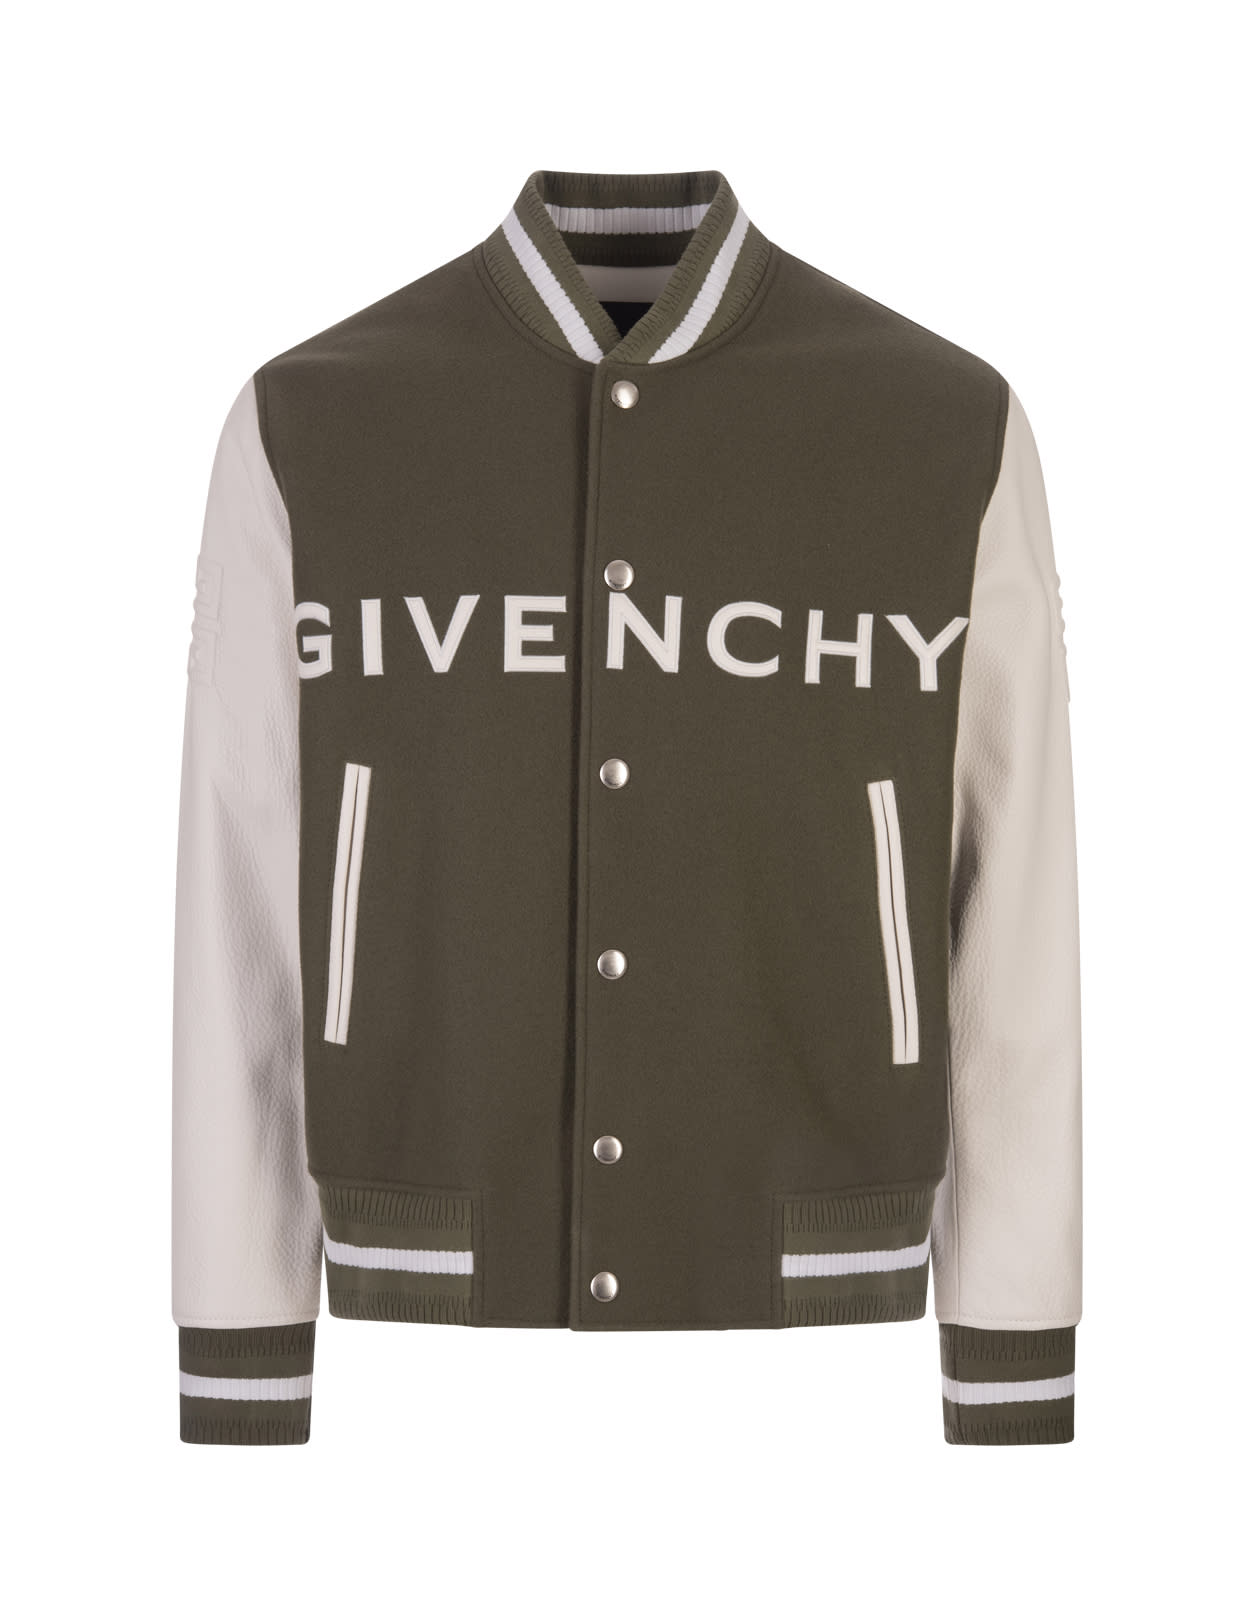 Khaki And White Givenchy Bomber Jacket In Wool And Leather